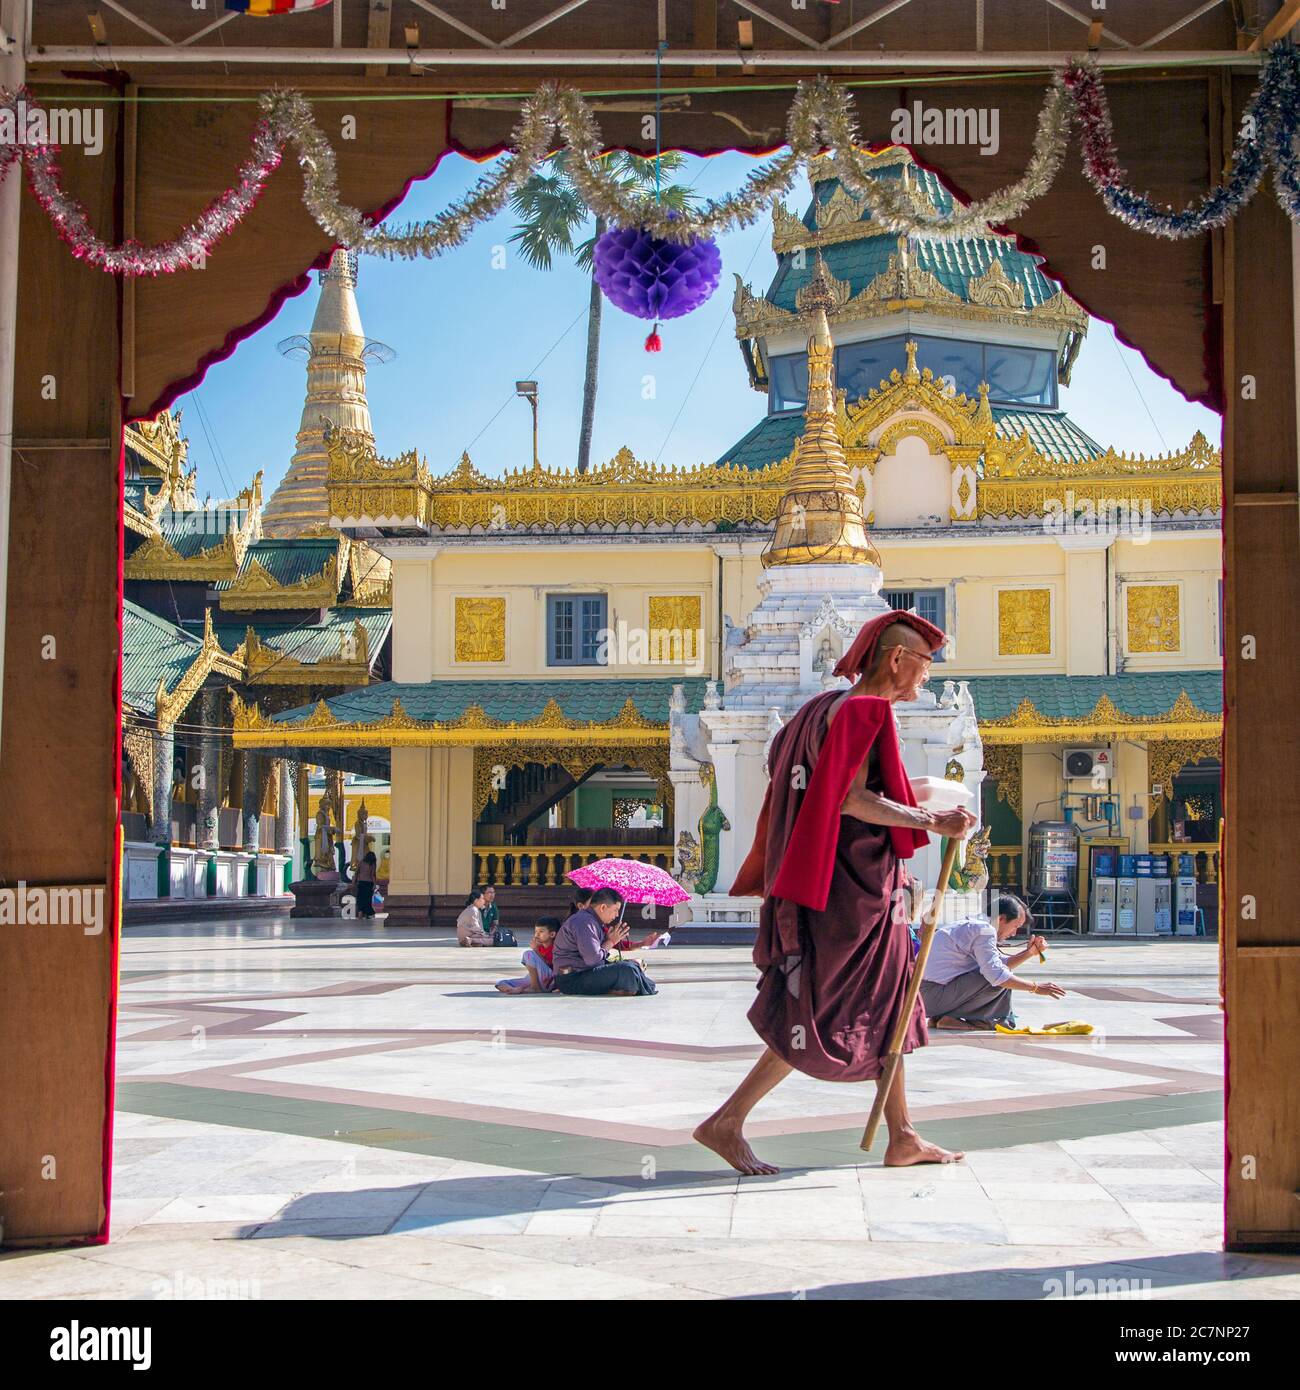 A Buddhist monk in traditional dress walks between temples at the Shwedagon Pagoda in Yangon, Myanmar Stock Photo